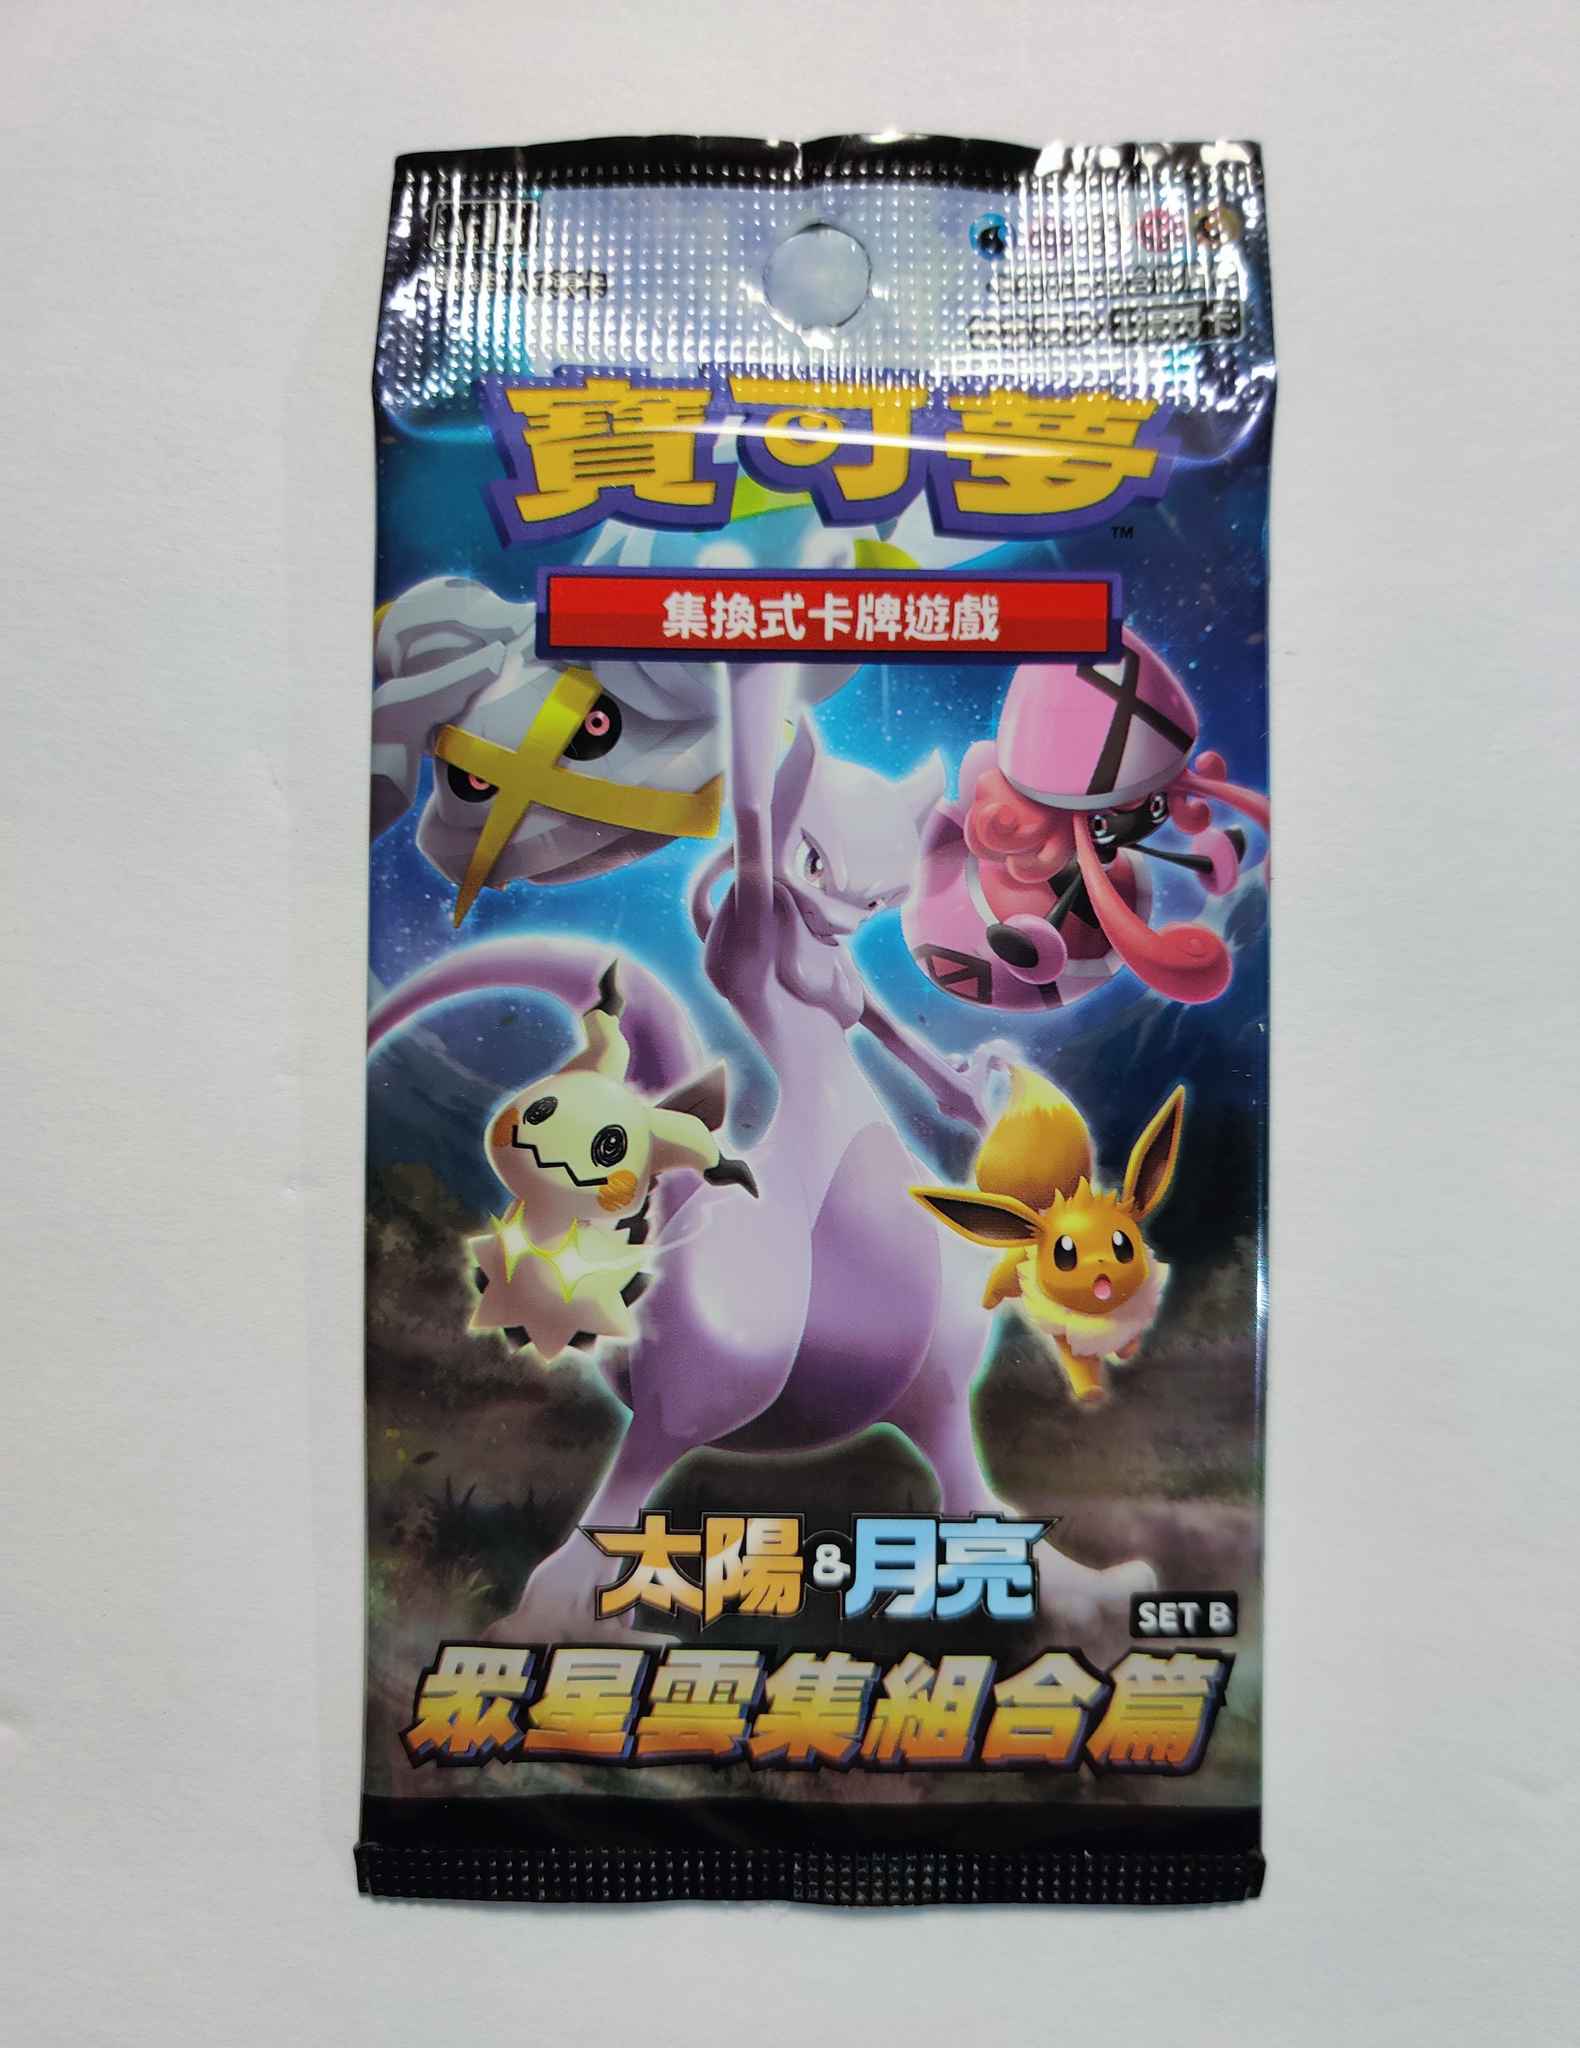 1 Pack Of Pokemon Chinese Hidden Fates Set B Stars Collection Ships From USA 